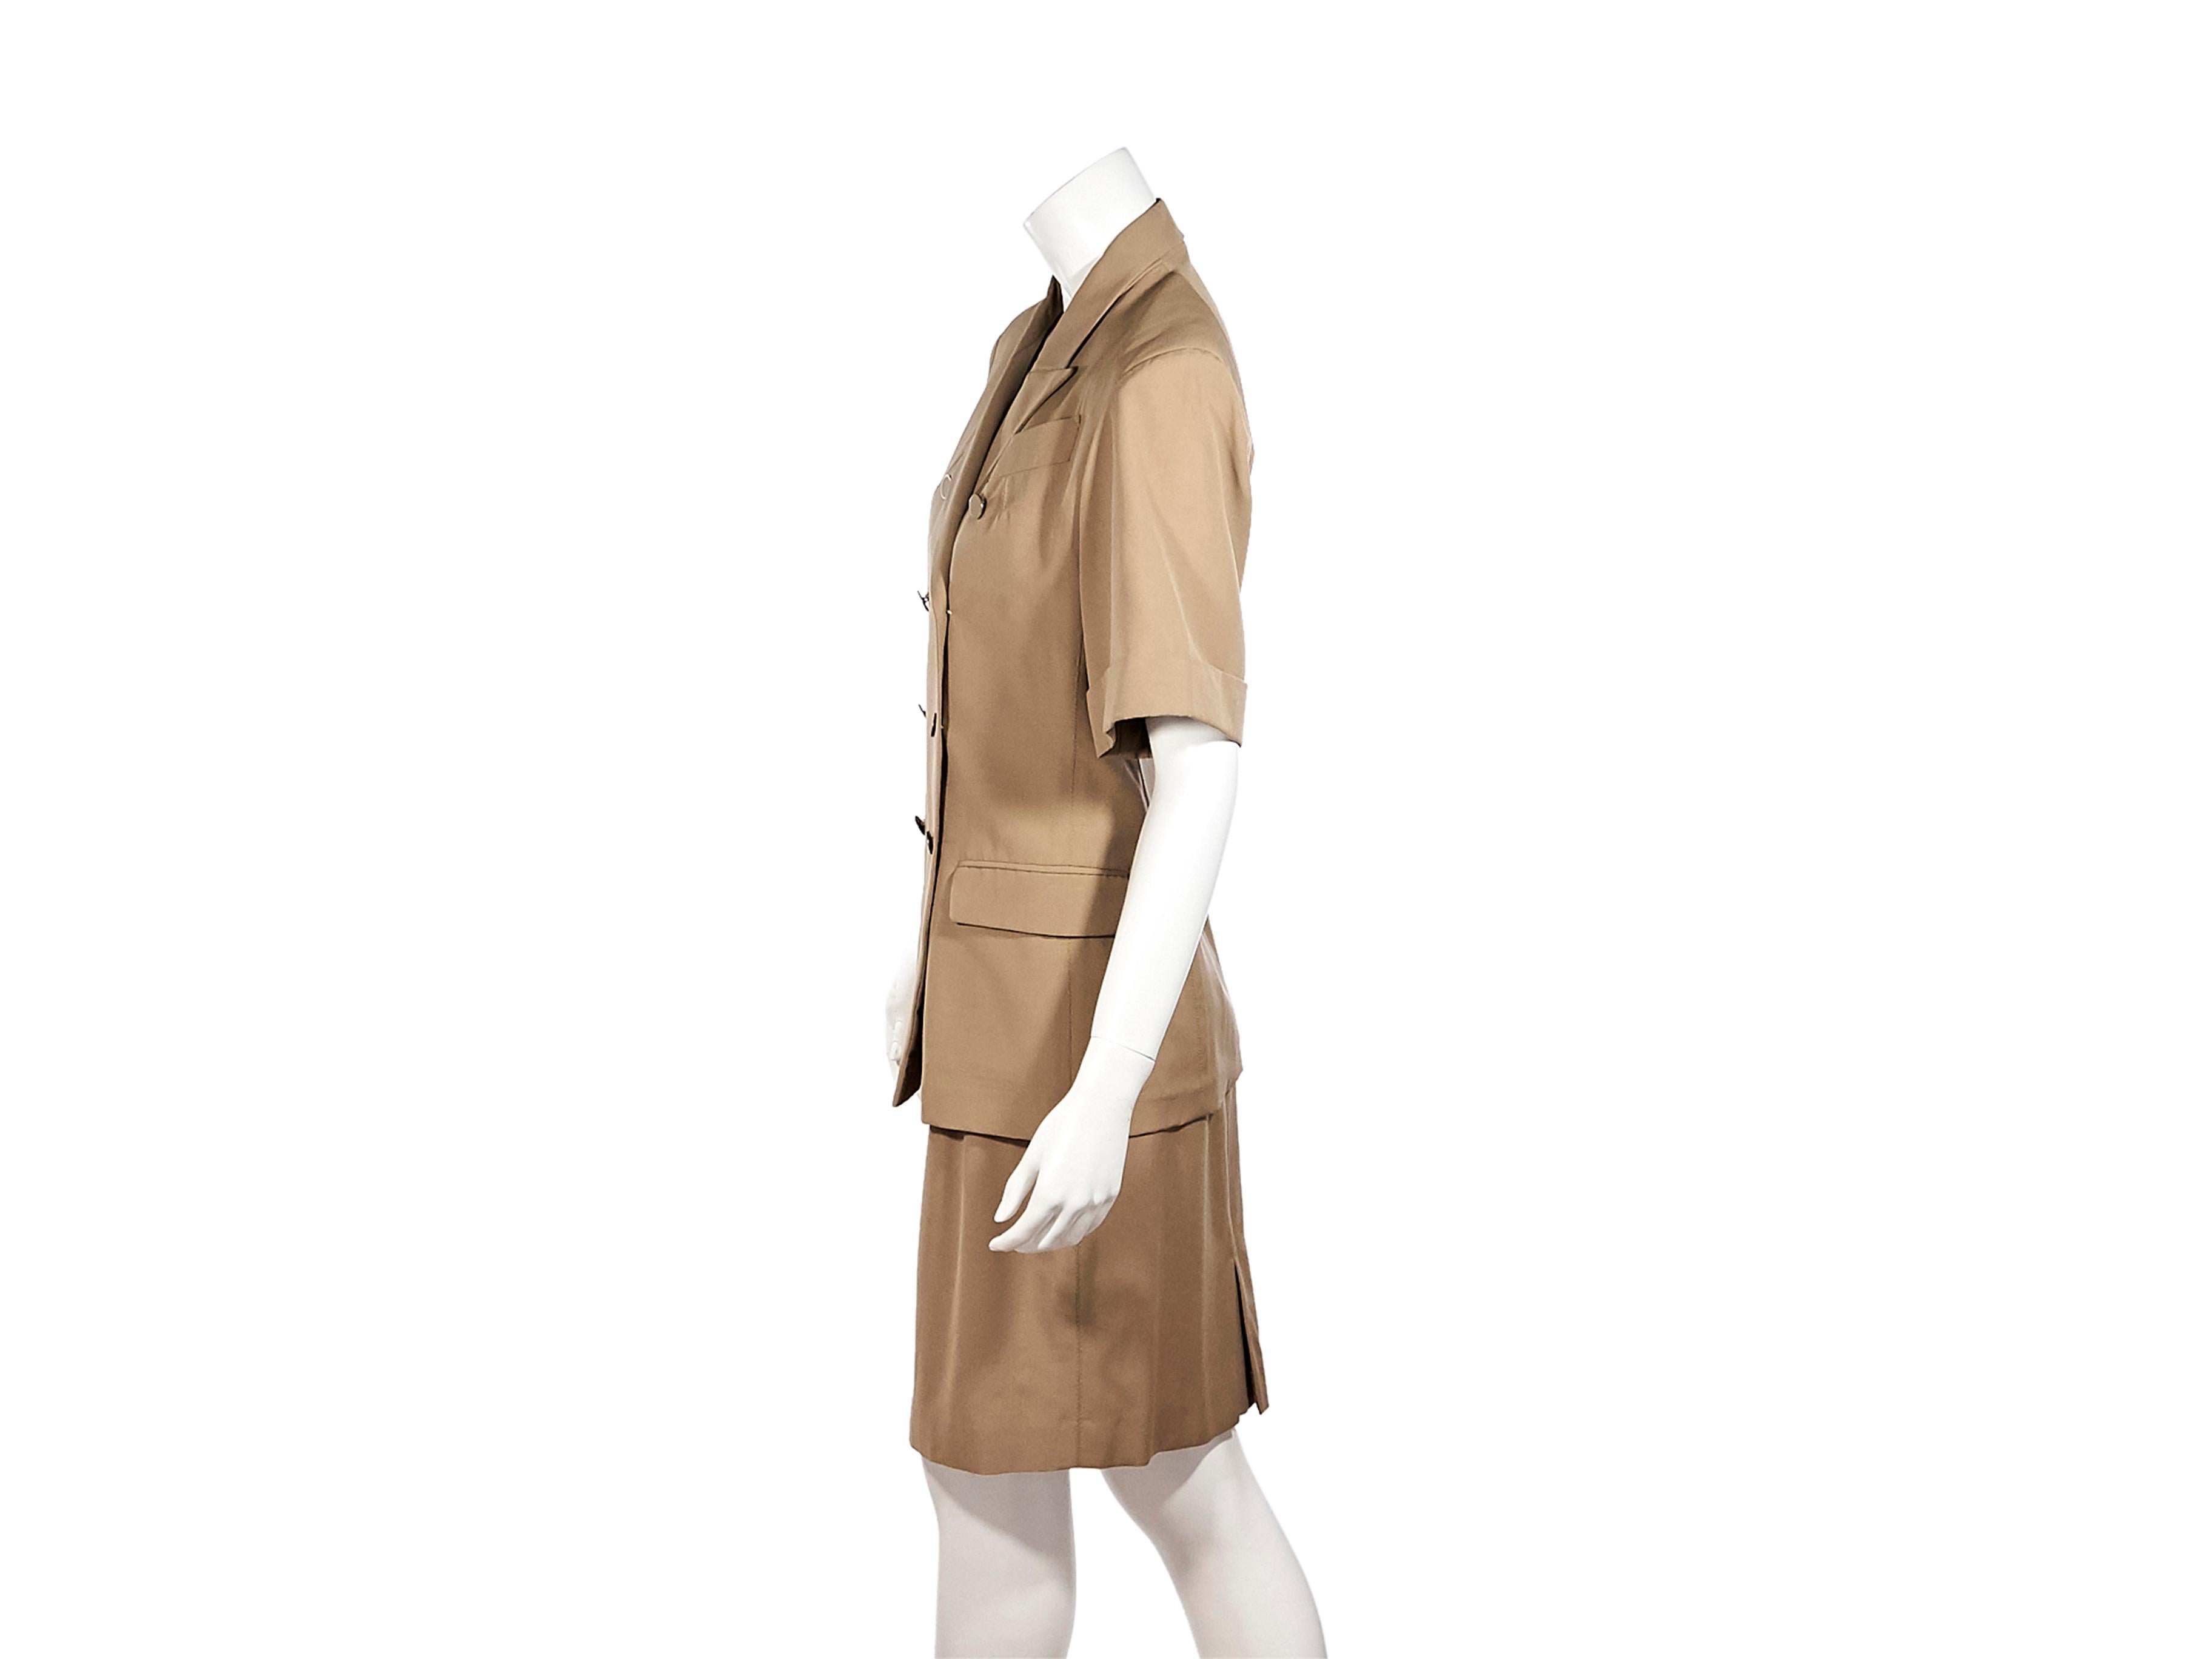 Product details:  Tan skirt suit set by Jean Paul Gaultier Femme.  Peak lapel.  Elbow-length sleeves.  Double-breasted button-front closure.  Chest besom pocket.  Waist flap pockets.  Matching pencil skirt.  Grosgrain banded waist.  Center back hem